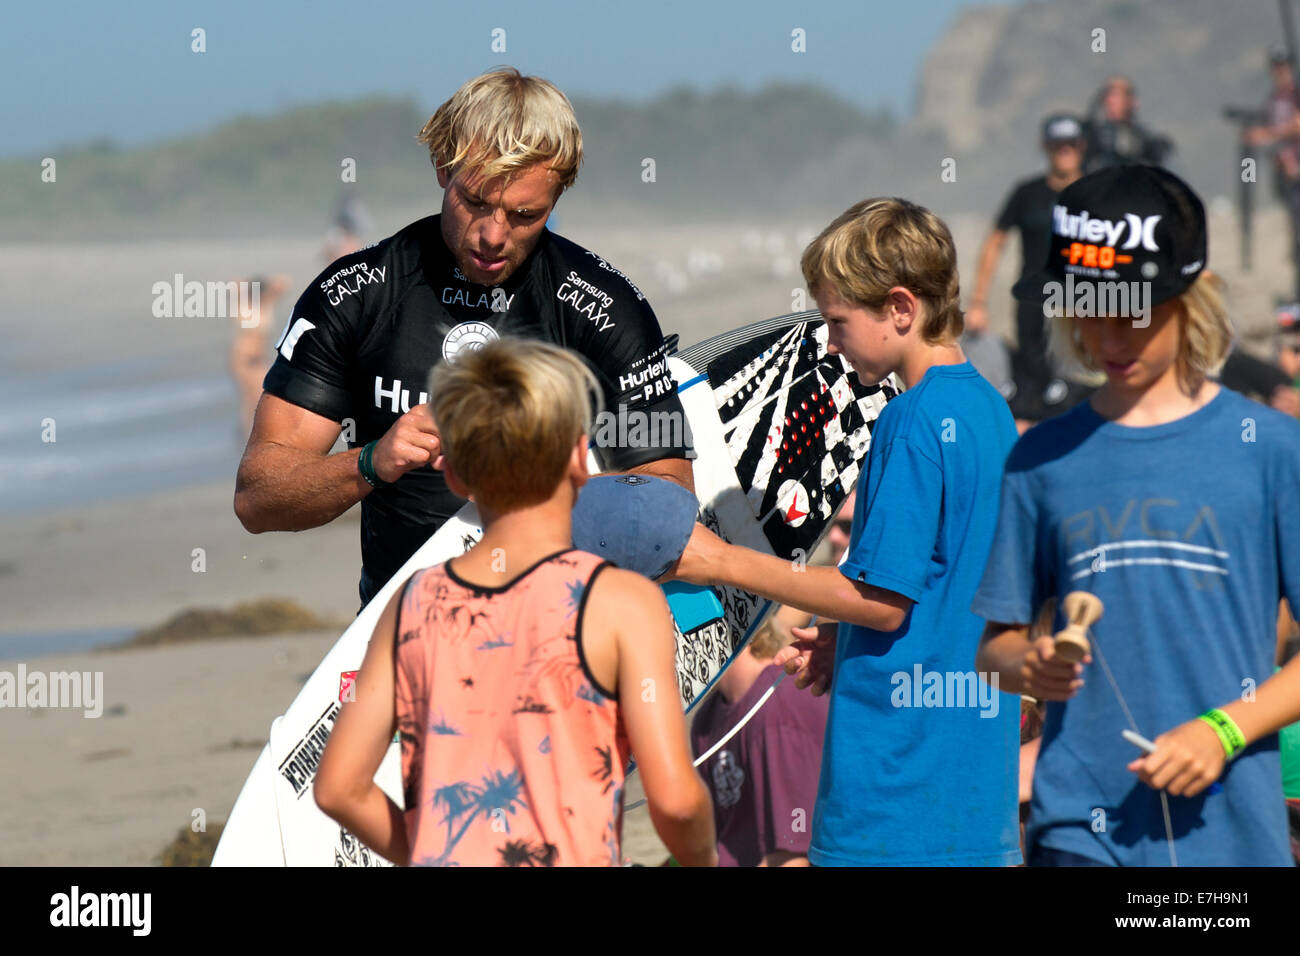 Lower Trestles, California, USA. 11th September, 2014. Local favorite Tanner Gudauskas signs autographs for fans after his heat against 11 time world champion Kelly Slater during Round 4 of the ASP WCT Hurley Pro, located at Lower Trestles, San Clemente, CA on September 11, 2014. Stock Photo